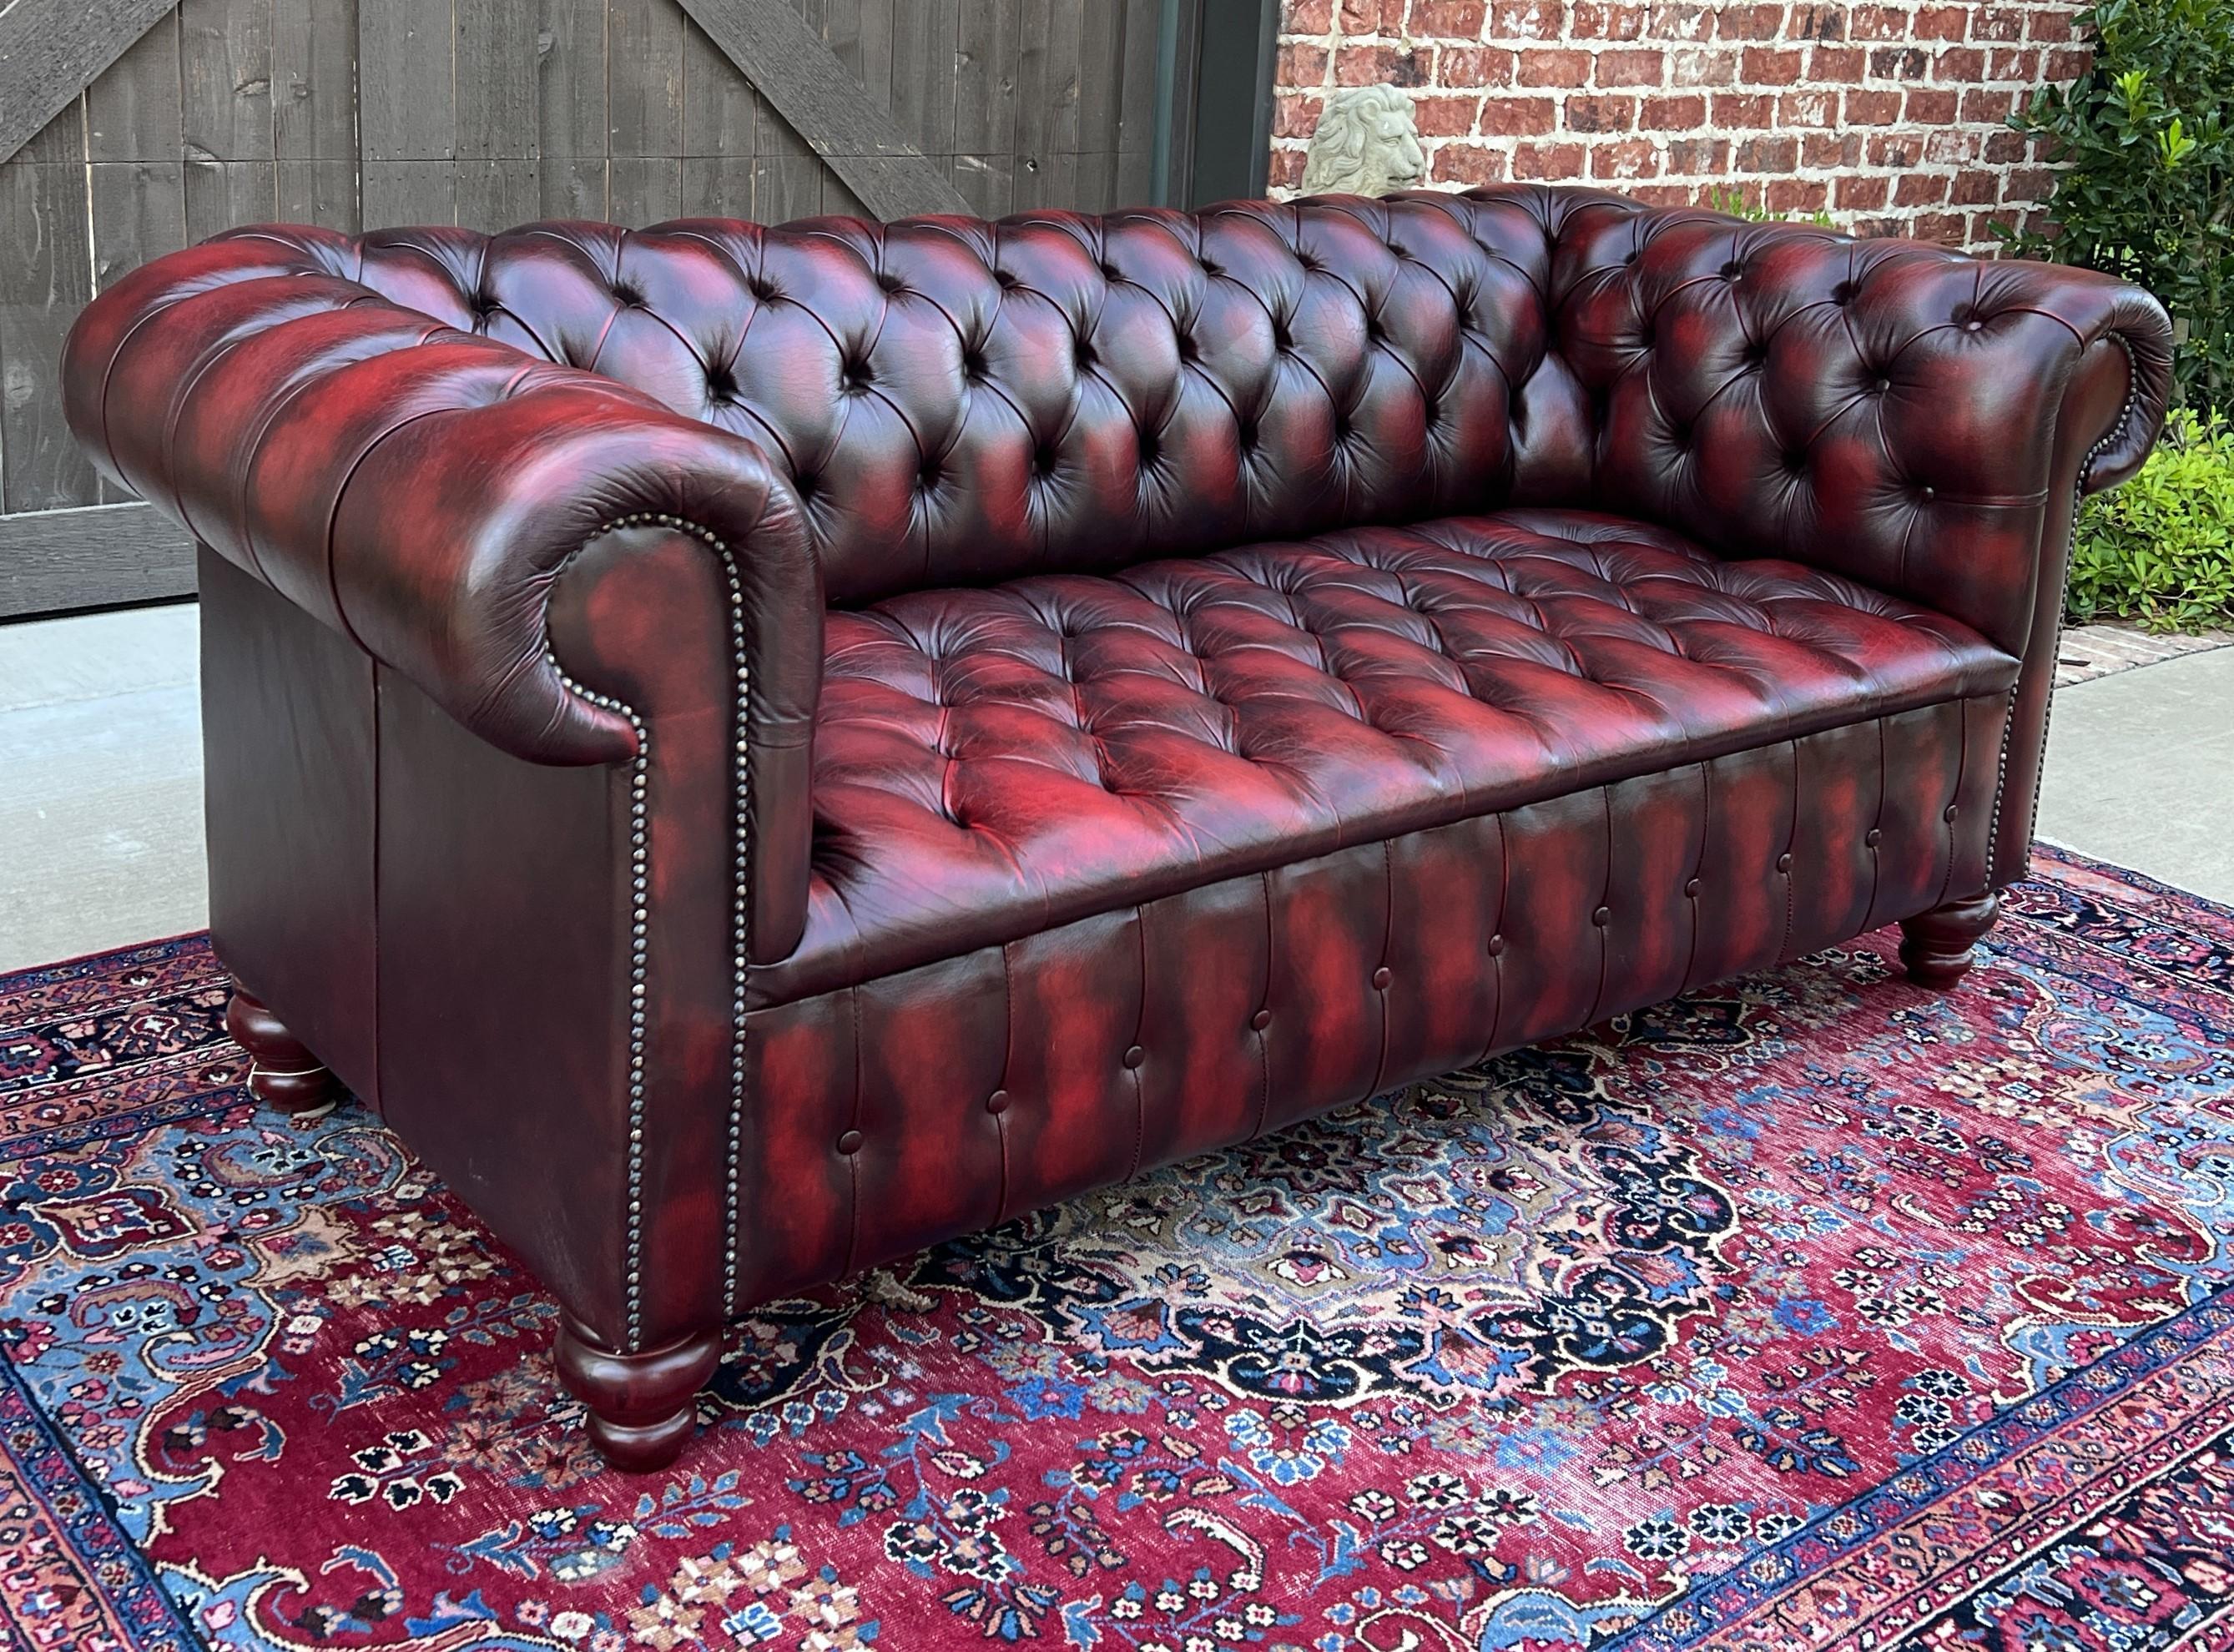 TIMELESS Vintage Mid-Century English Leather Tufted Seat CHESTERFIELD 3-Seat Sofa in Oxblood Red

PERFECT ICONIC look for a gentleman's office, study, library, or cigar lounge~~fully tufted button seat and rolled arms with low back~~oxblood red